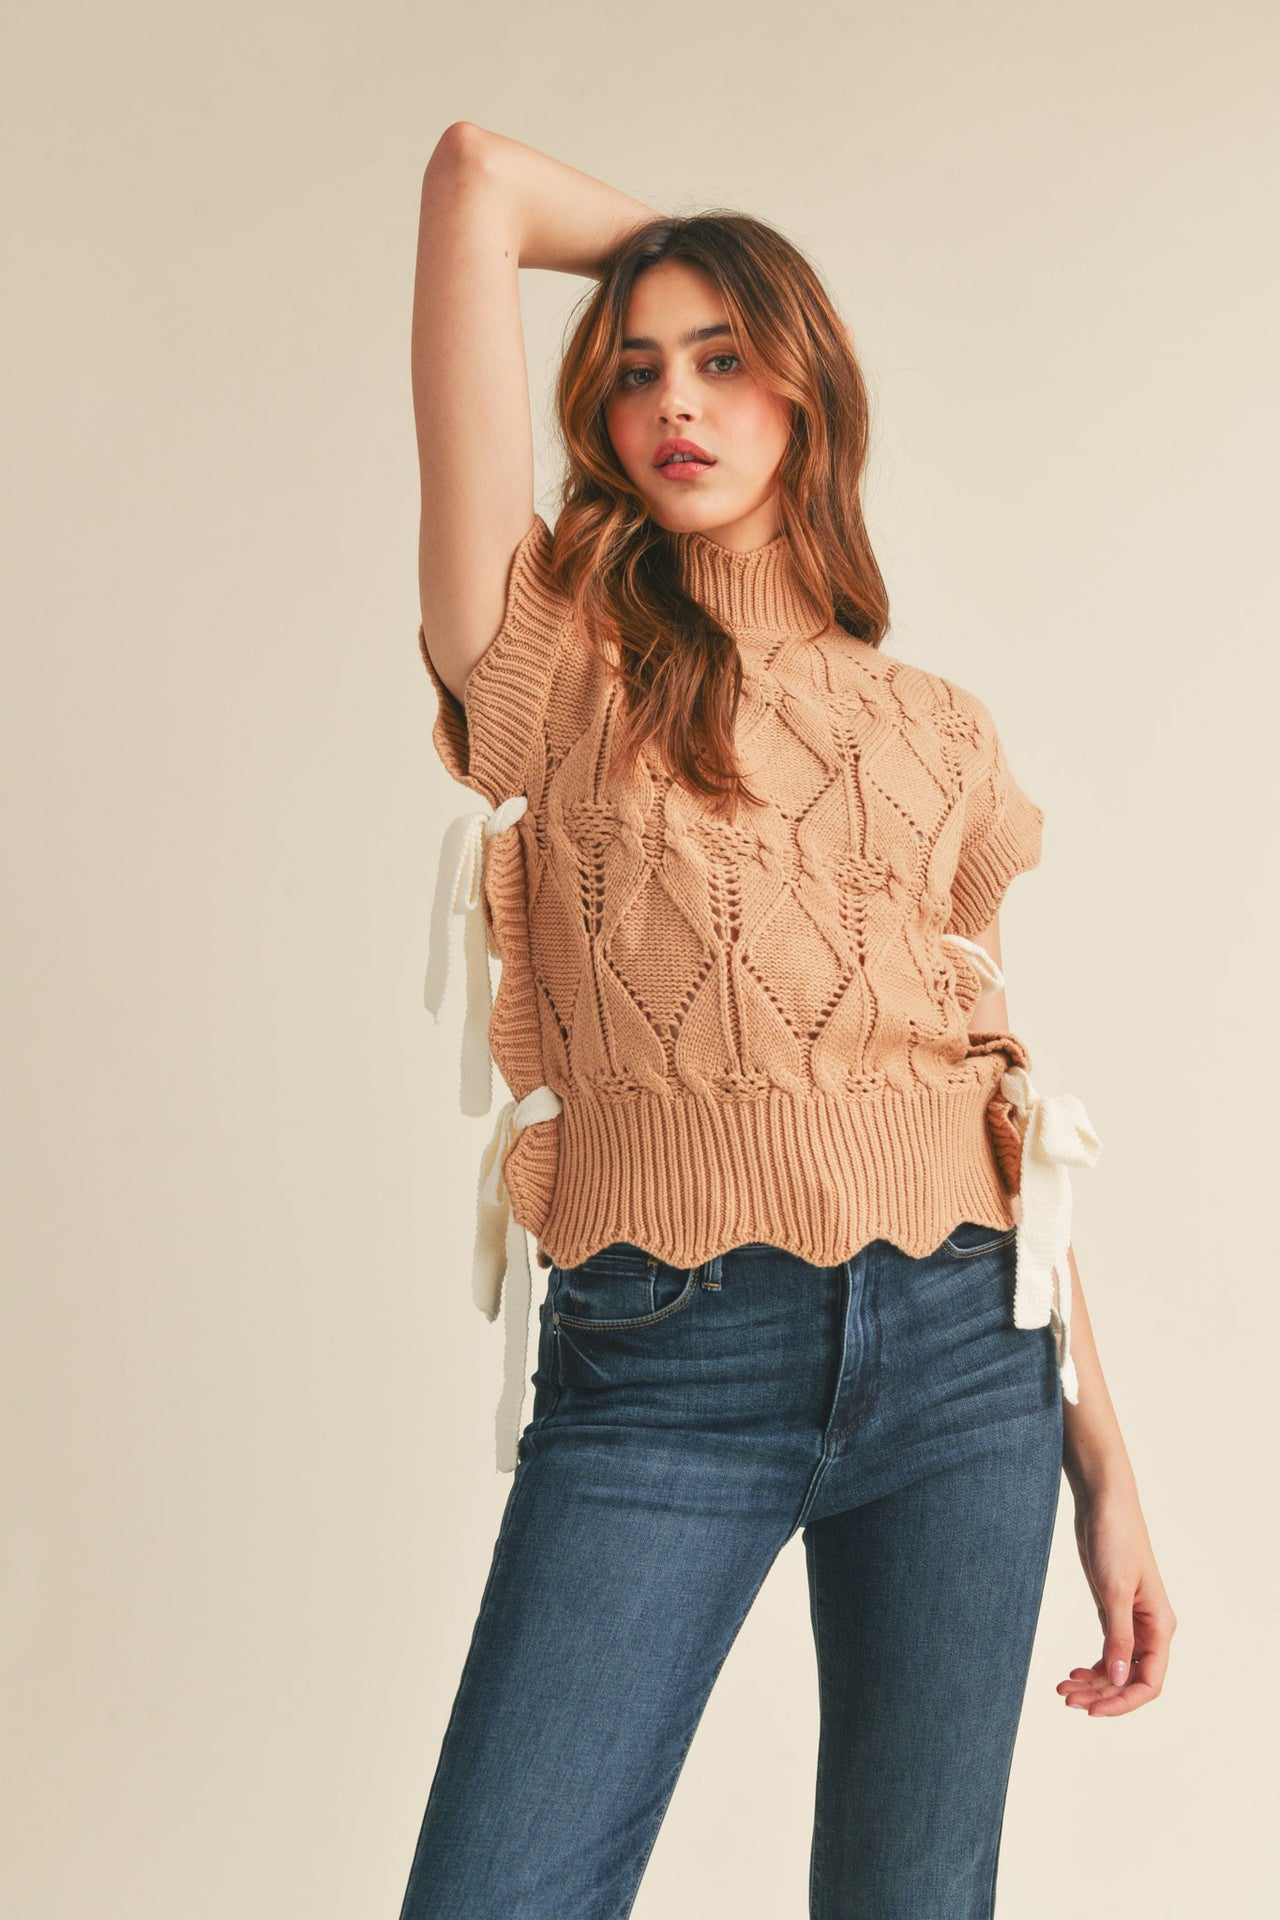 The Halle Top